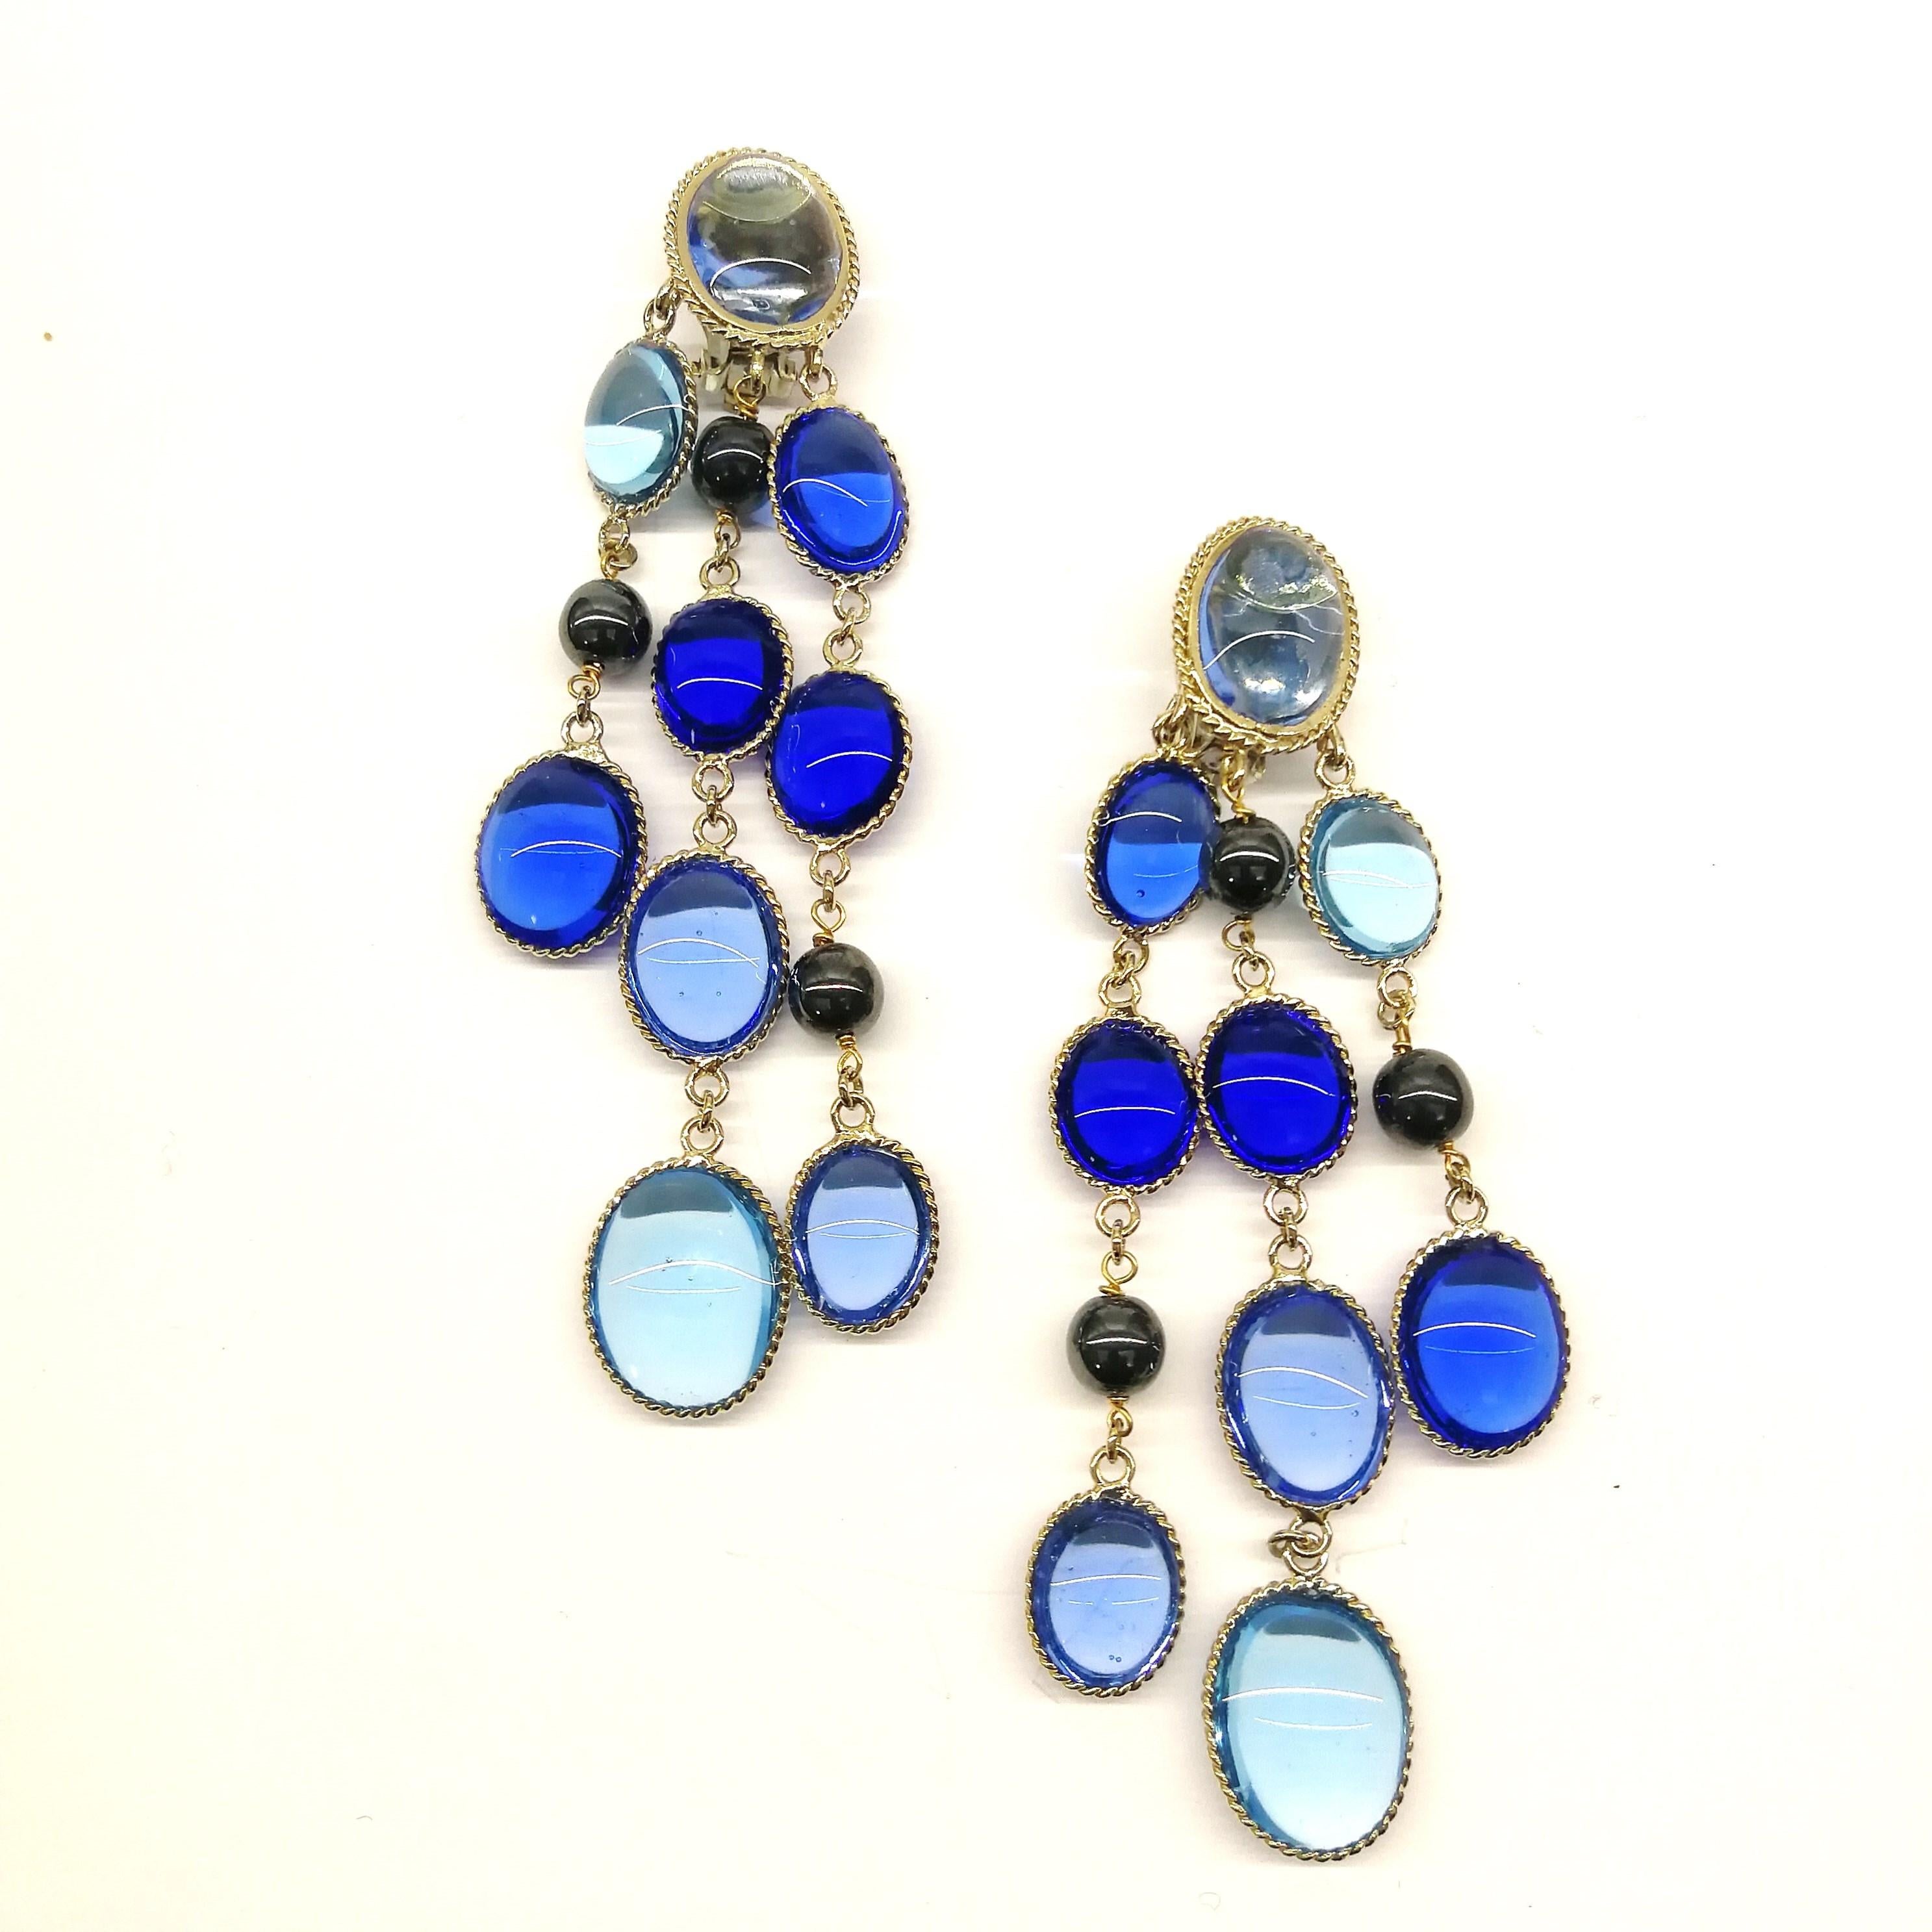 'WW; sapphire, light sapphire poured glass, and pearl 3 row drop earrings, 2018 For Sale 7